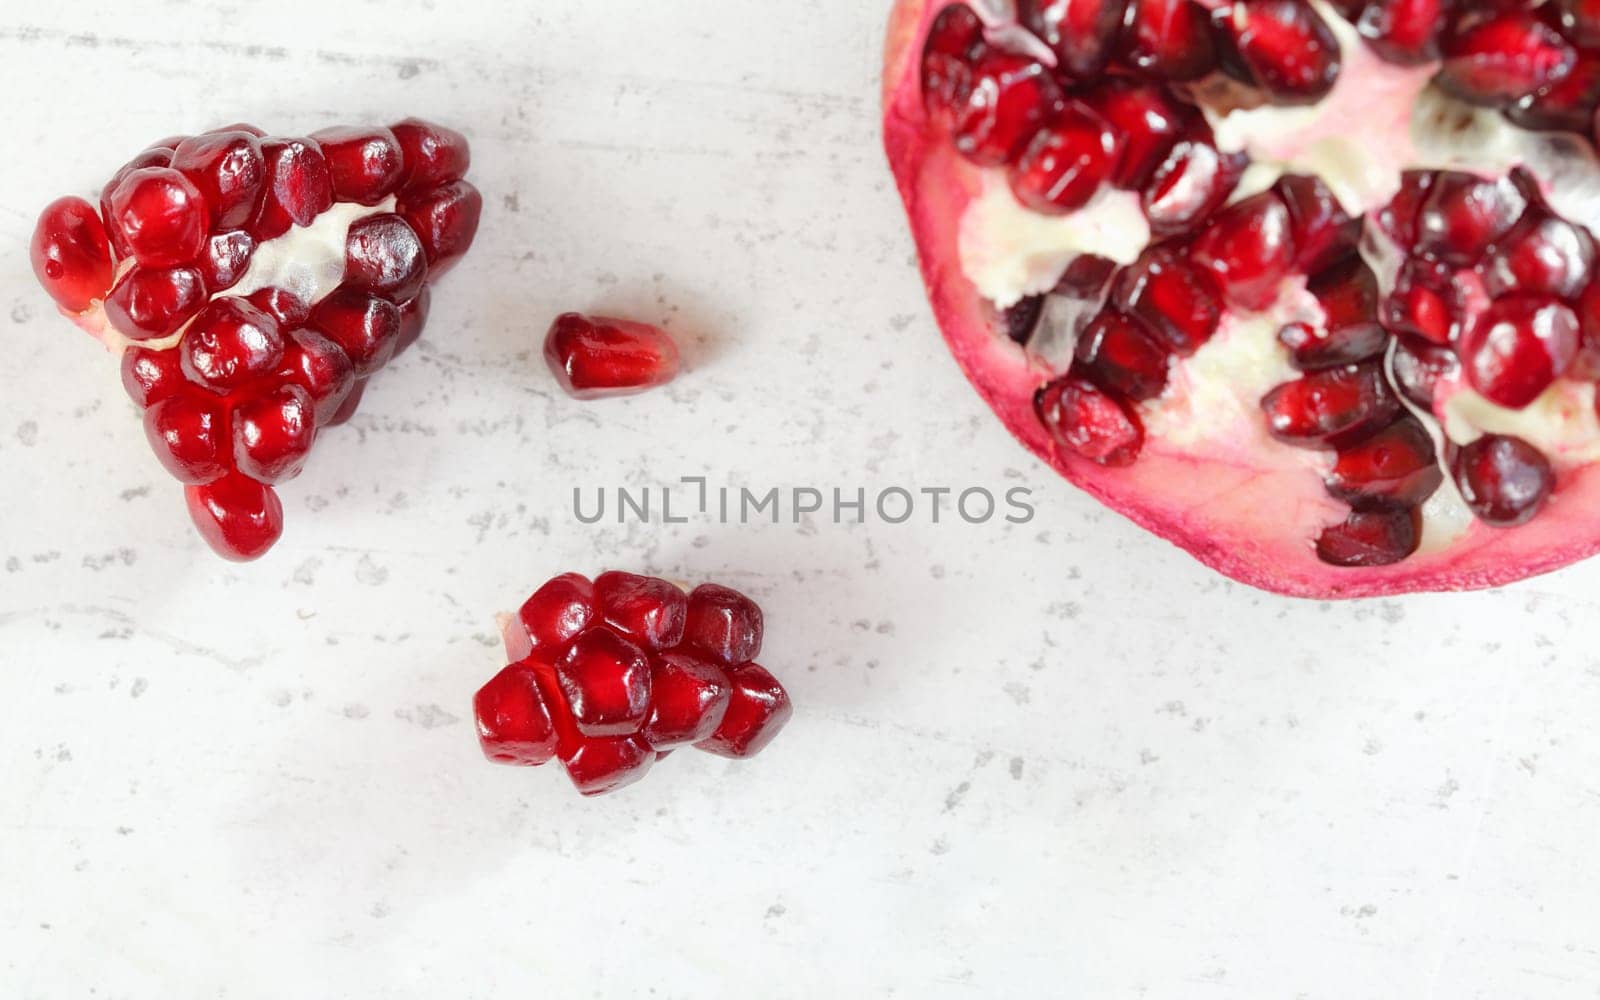 Pomegranate halved, gem like fruits next to it on white stone board, top down view.